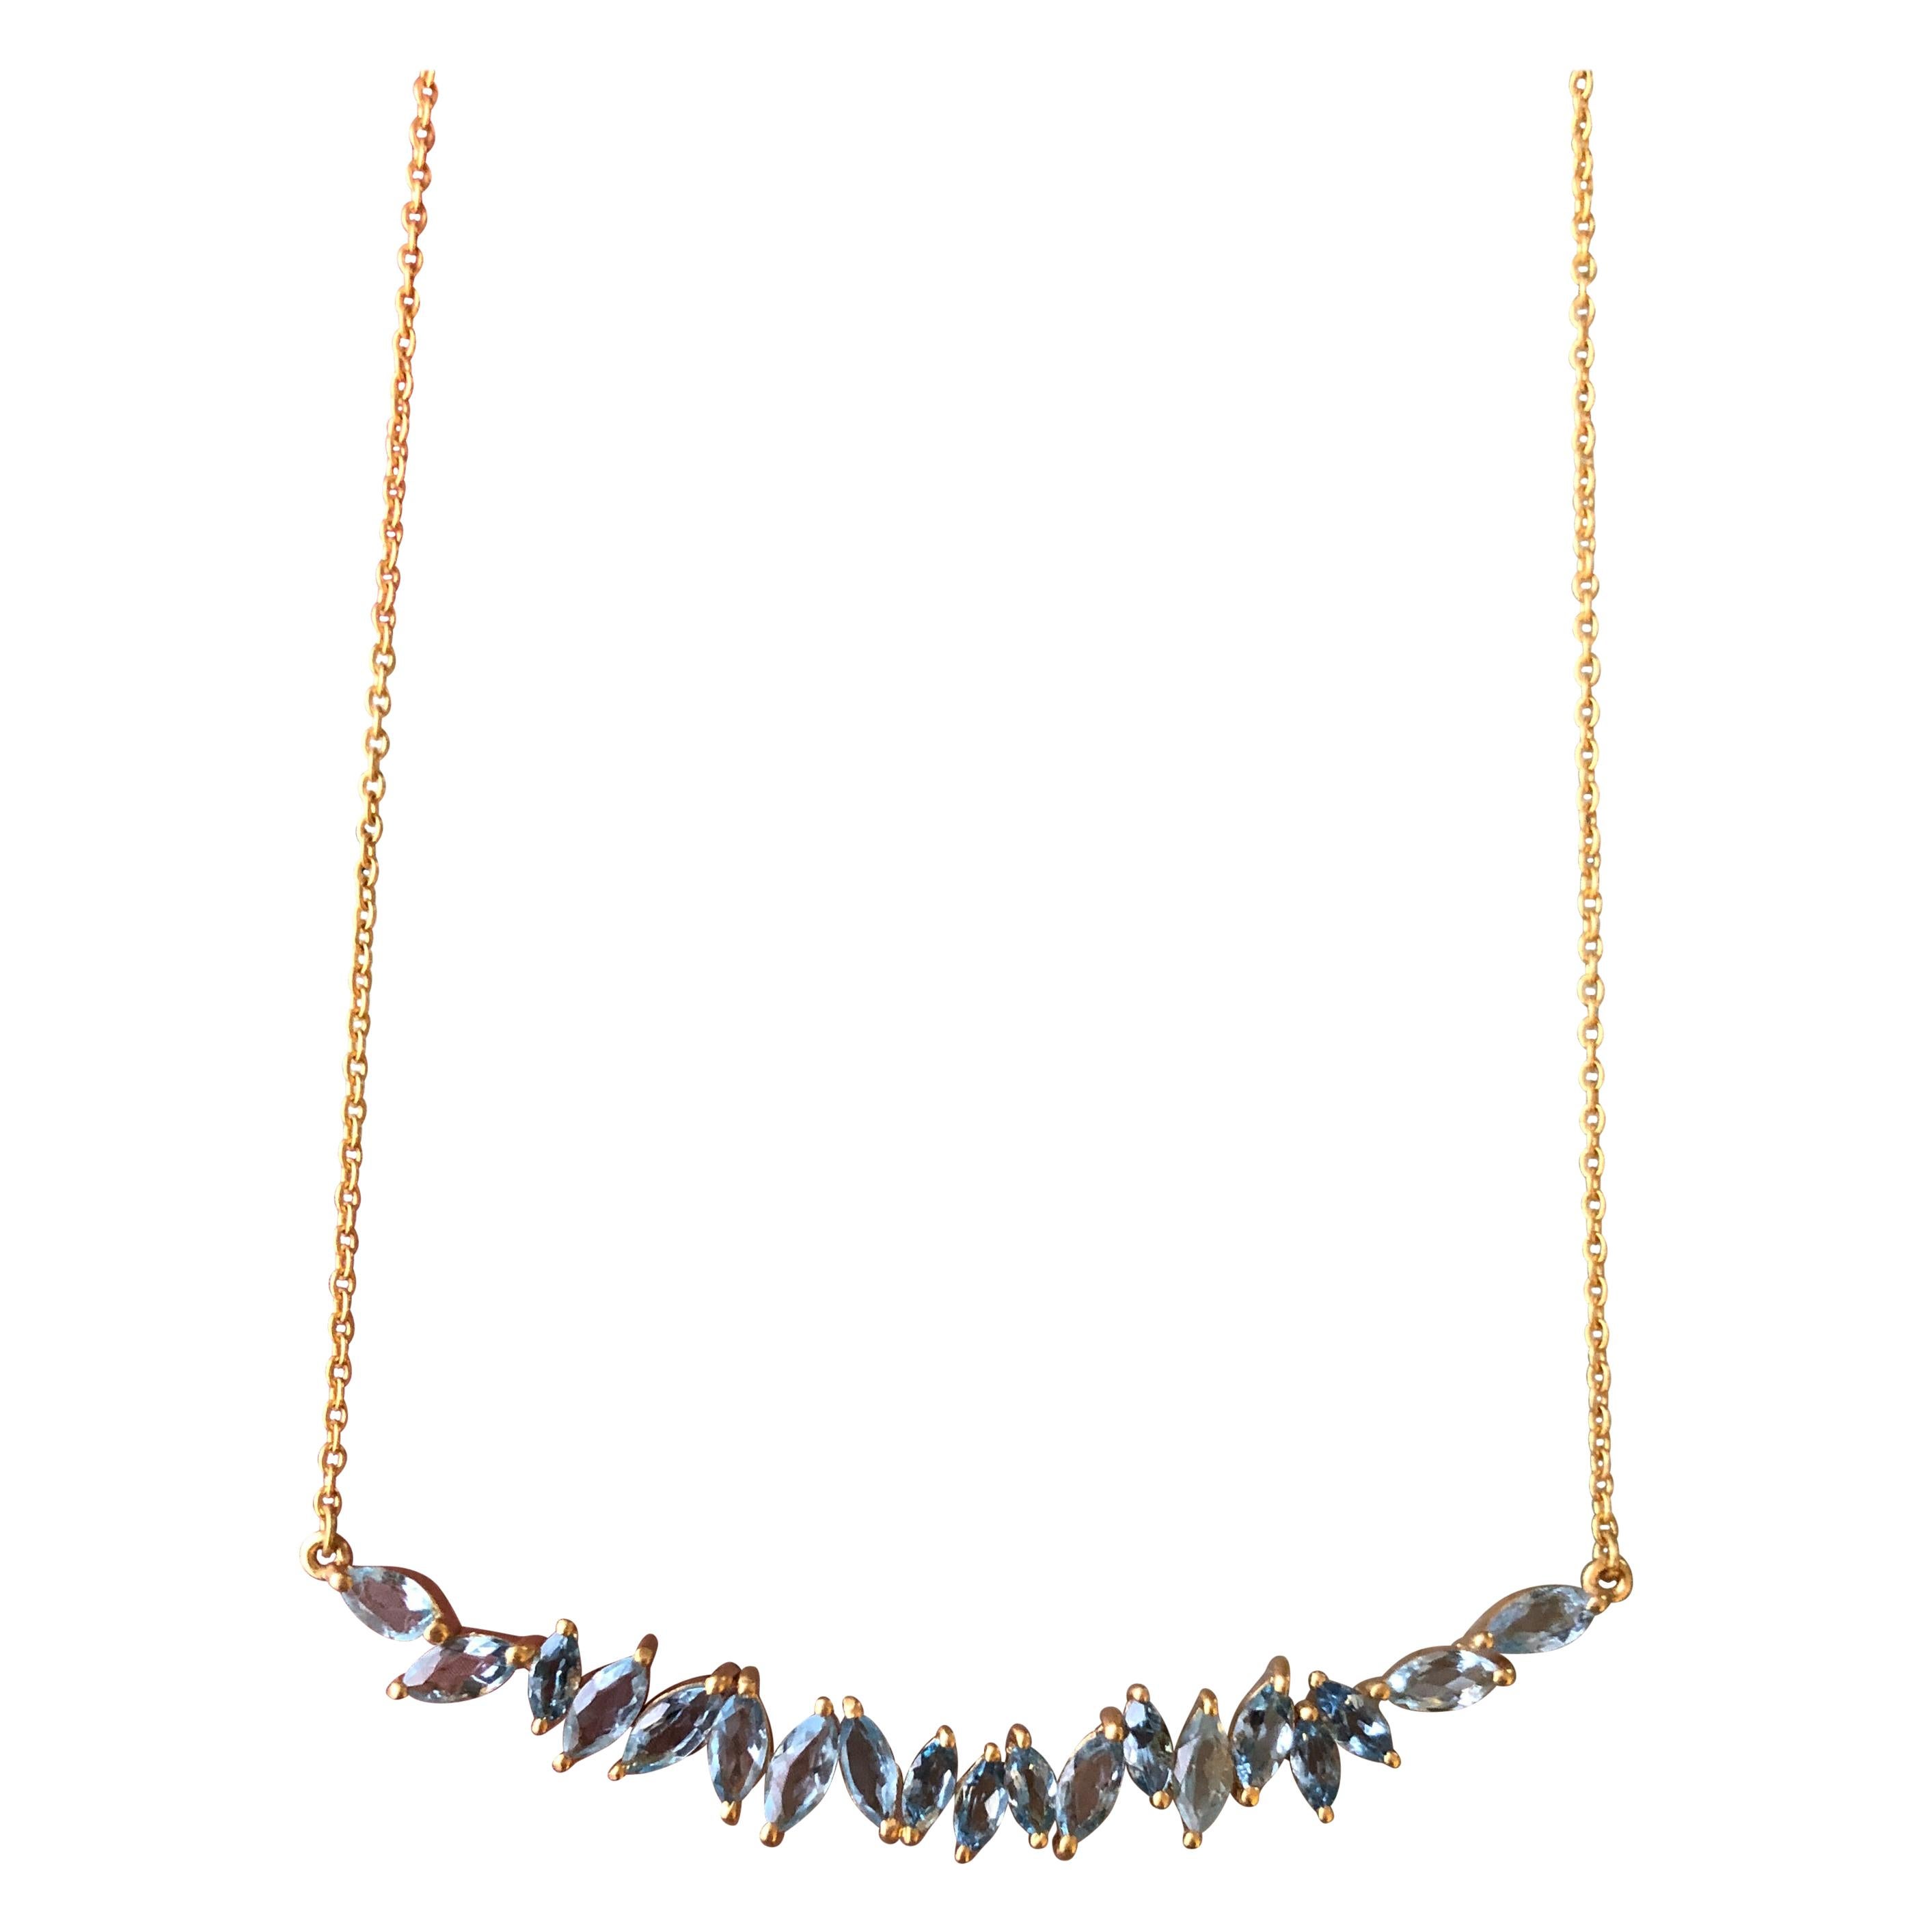 Designed by award winning jewelry designer Lauren Harper, this necklace boasts 2.29 carat Aquamarine set in 18kt Gold.  Hand made with beautiful, vibrant and high quality stones. Adjustable length from 16 inches to 17.25 inches. Perfect finishing